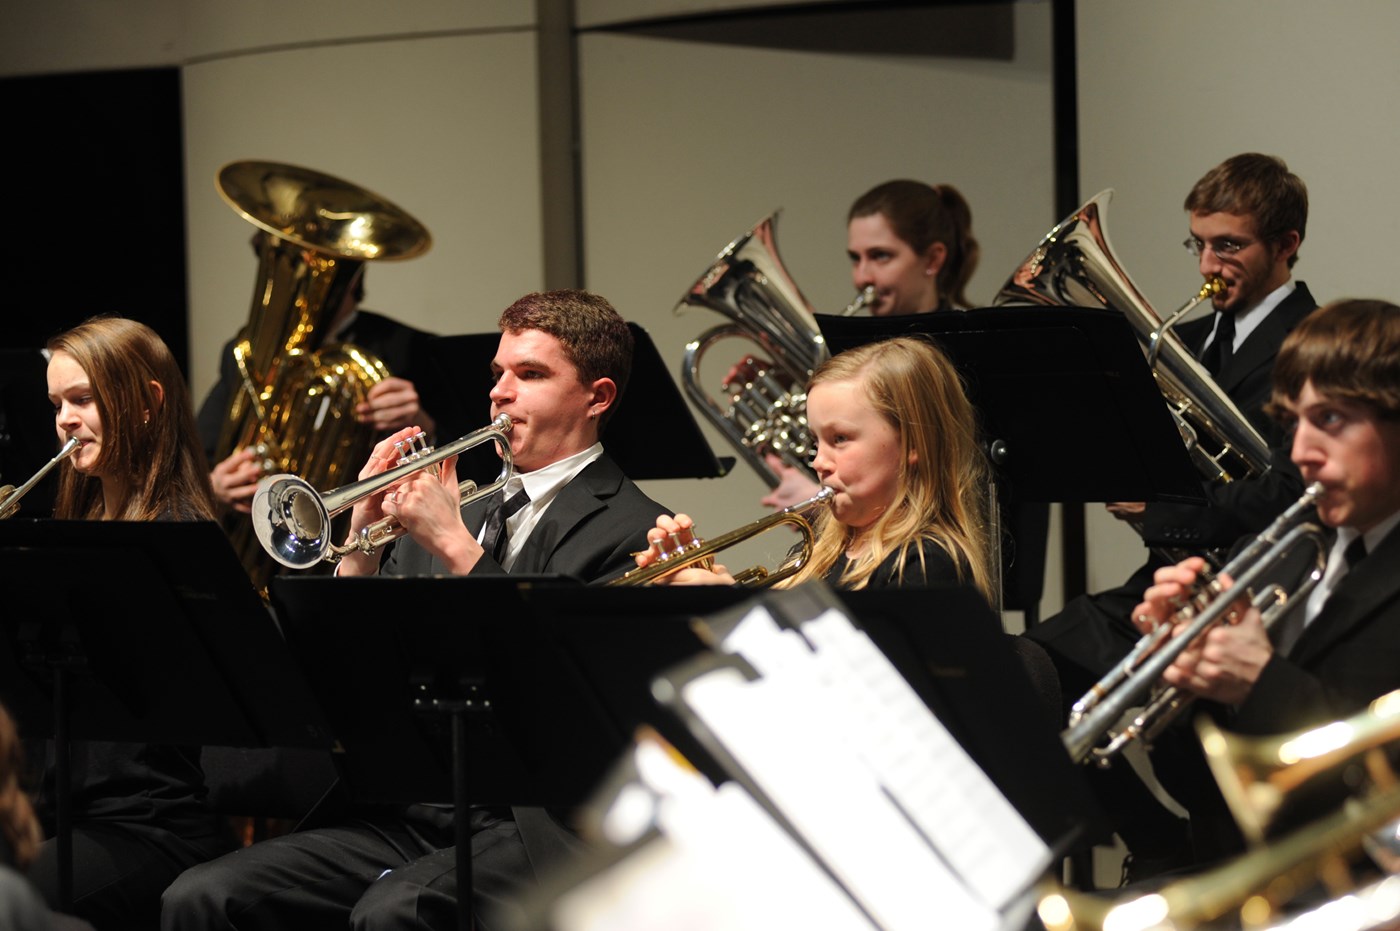 The Concert Band photo shows middle school trumpet and brass players seated next to college music performers also playing brass instruments each dressed in formal black concert dress performing music at Durgin Concert Hall on Umass Lowell’s South Campus.